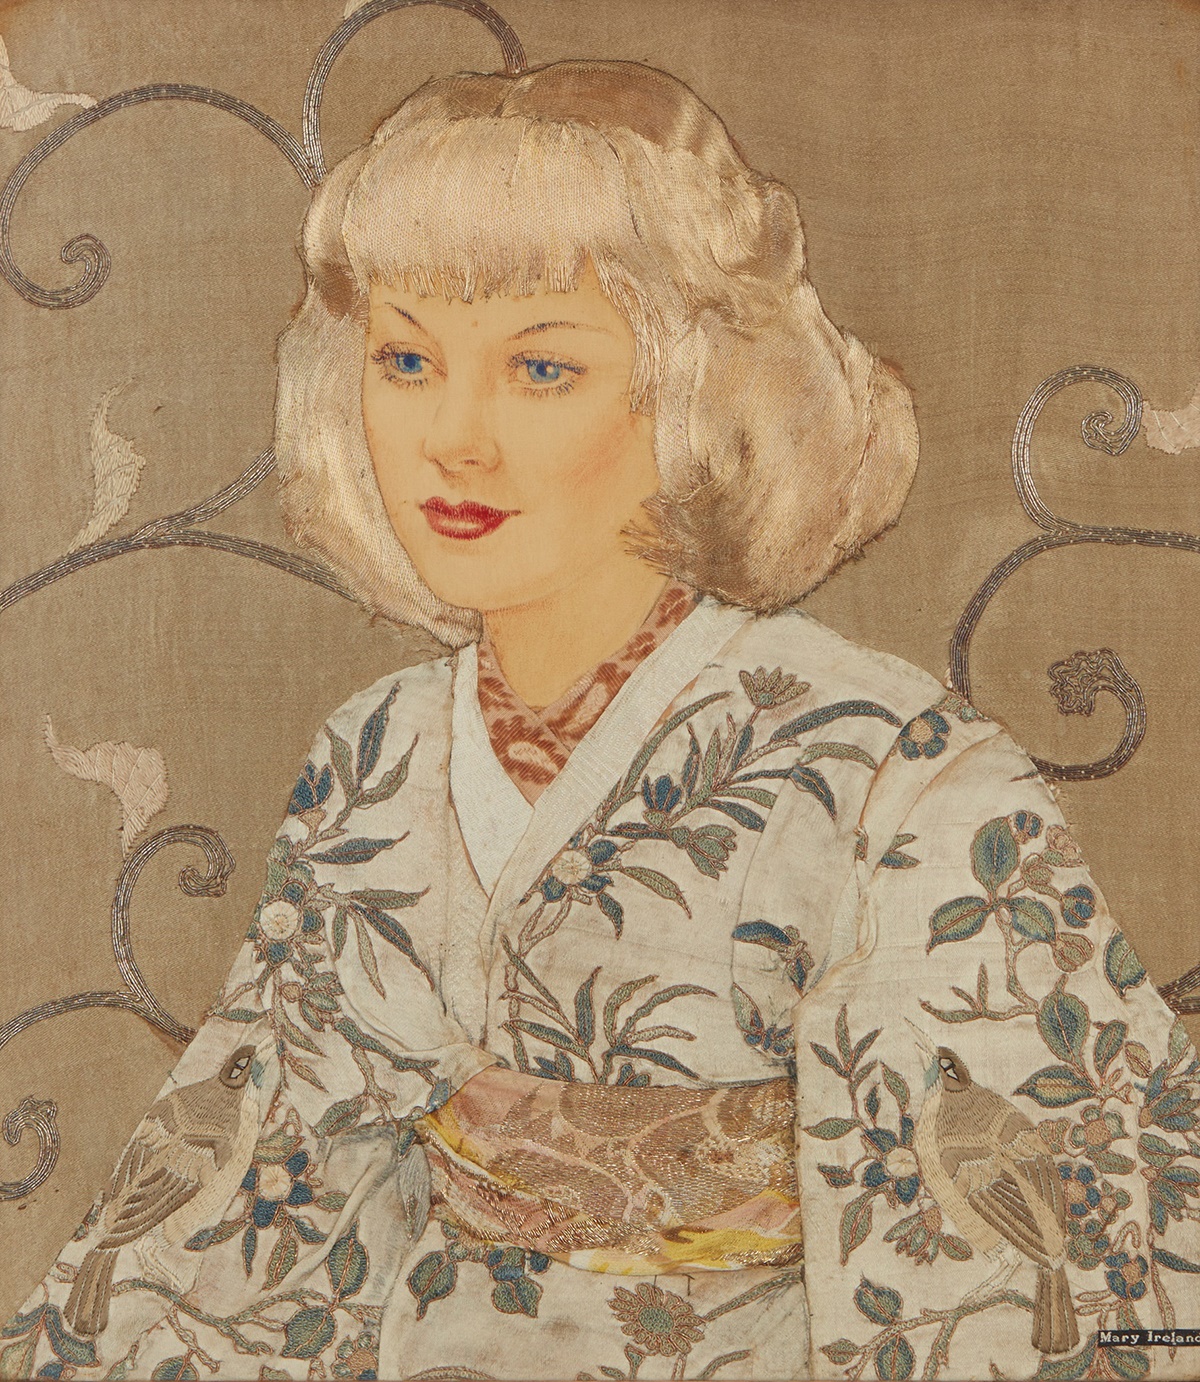 LOT 275 | MARY IRELAND (1891-C.1980) | ‘THE EMBROIDERED KIMONO’, DATED 1935 | 34cm x 24cm | £300 - £500 + fees